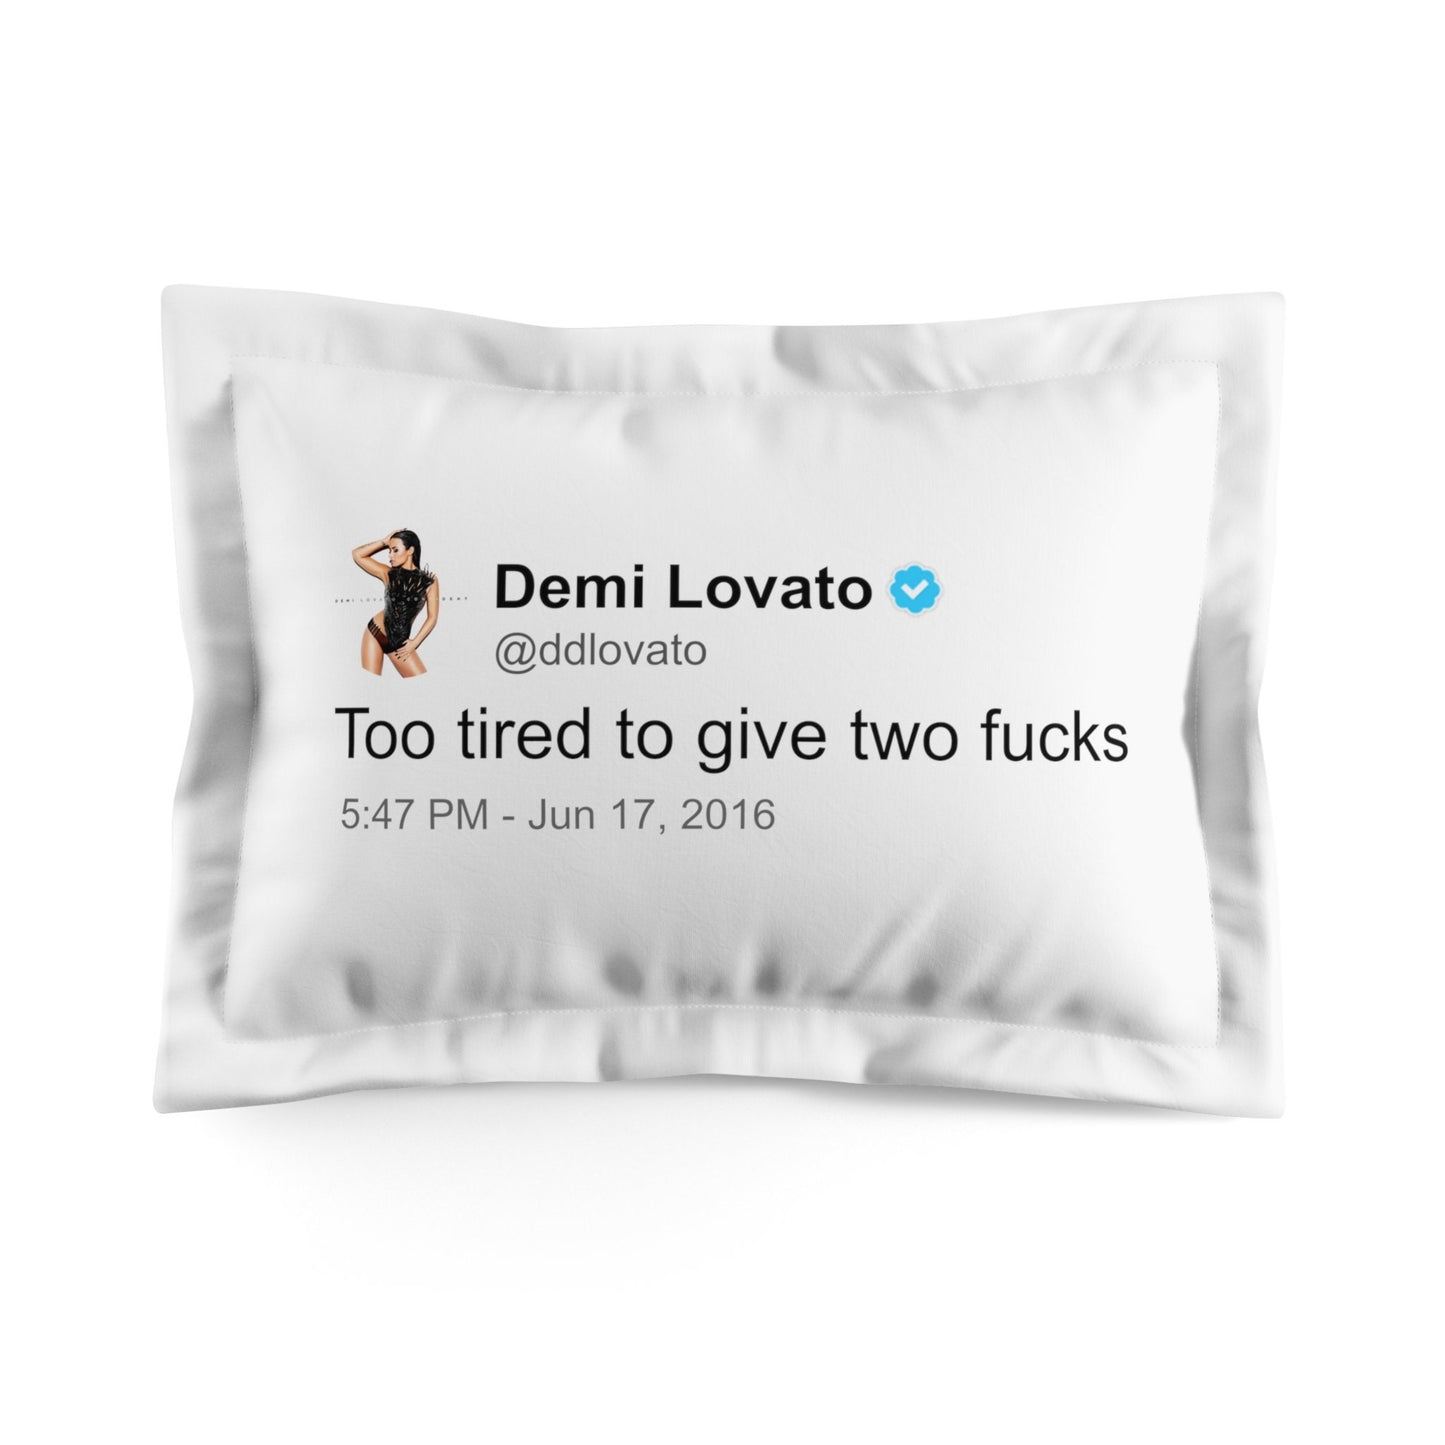 A preview of a white Demi Lovato pillowcase featuring a tweet telling us just how tired she is. The text is displayed in a bold, eye-catching font against the pillowcase's crisp, white background, capturing a moment of candidness and relatable sentiment from the artist.